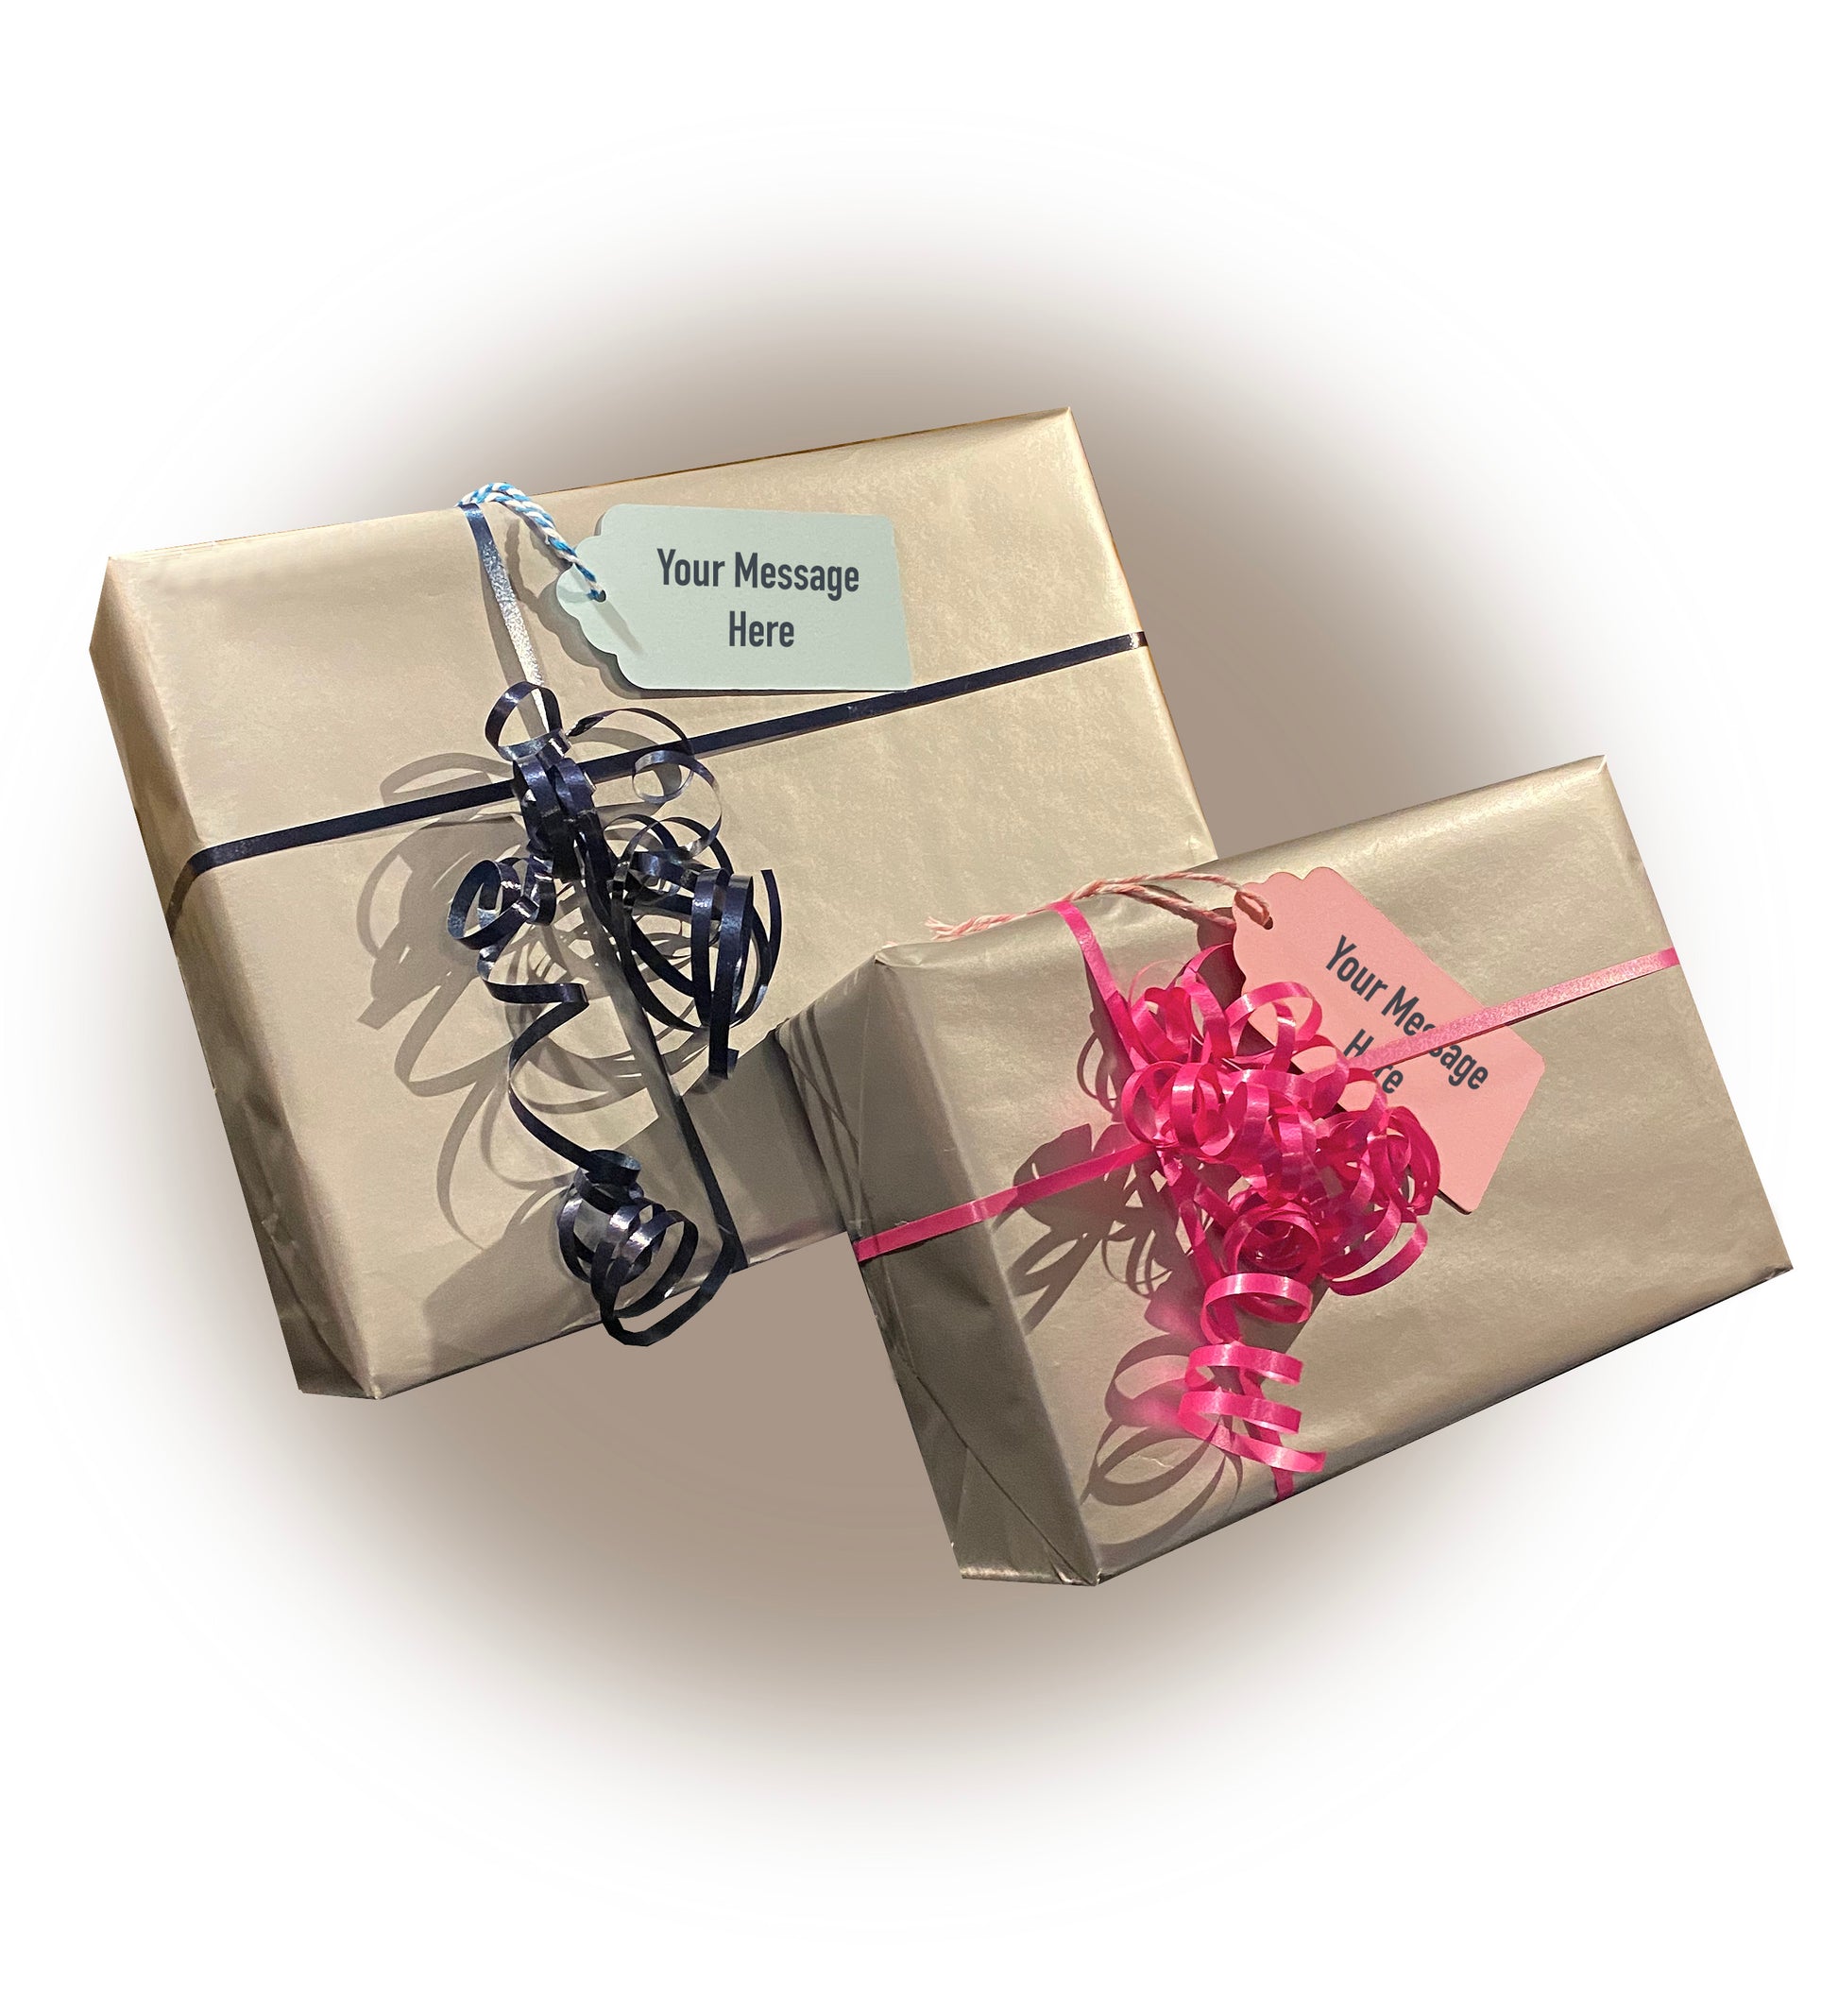 picture of chompinator variety box gift wrapped